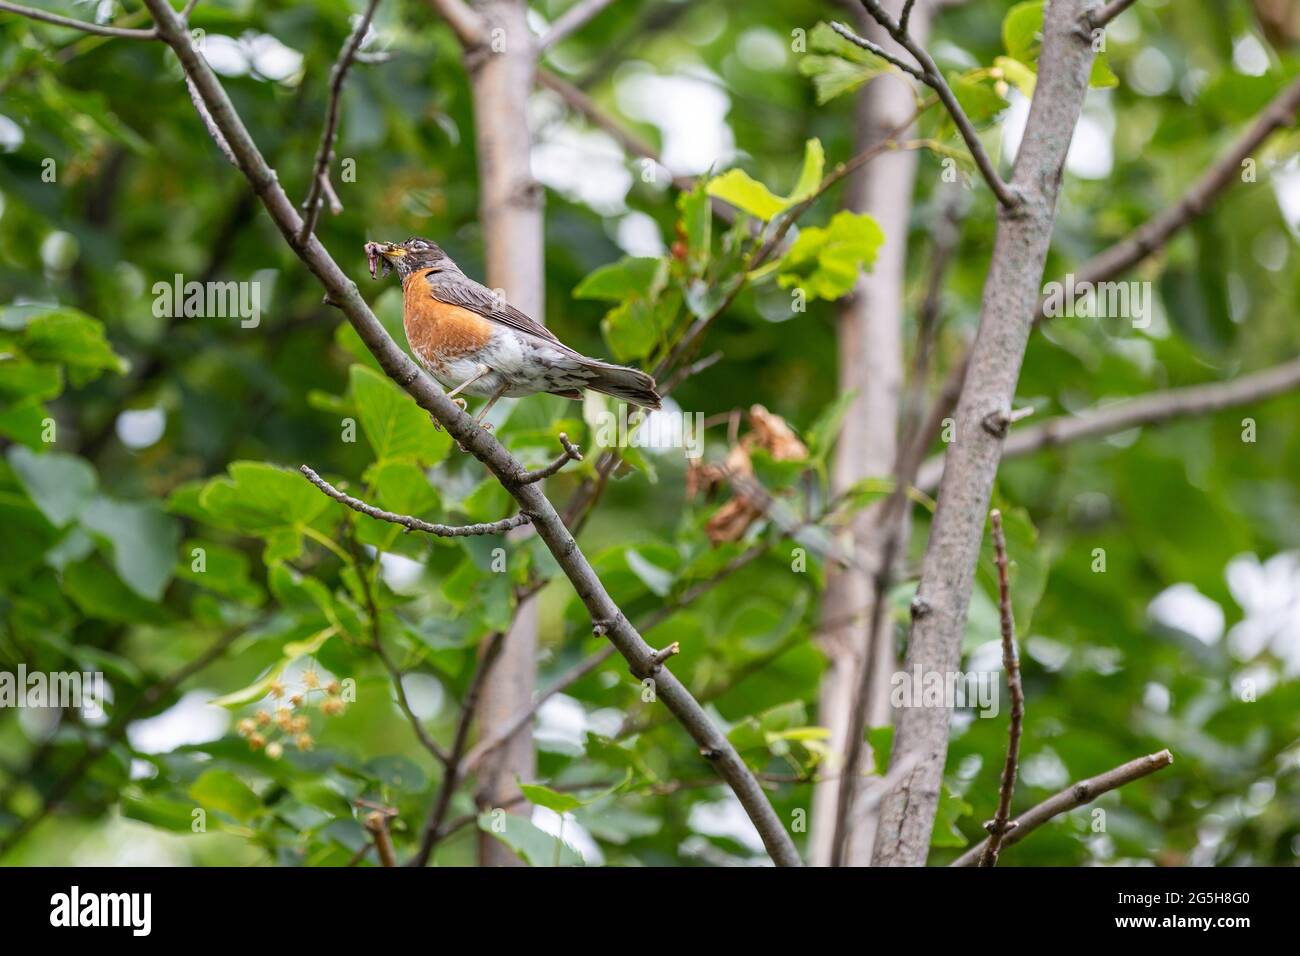 An American Robin perched in a tree holding an insect in his beak. Stock Photo